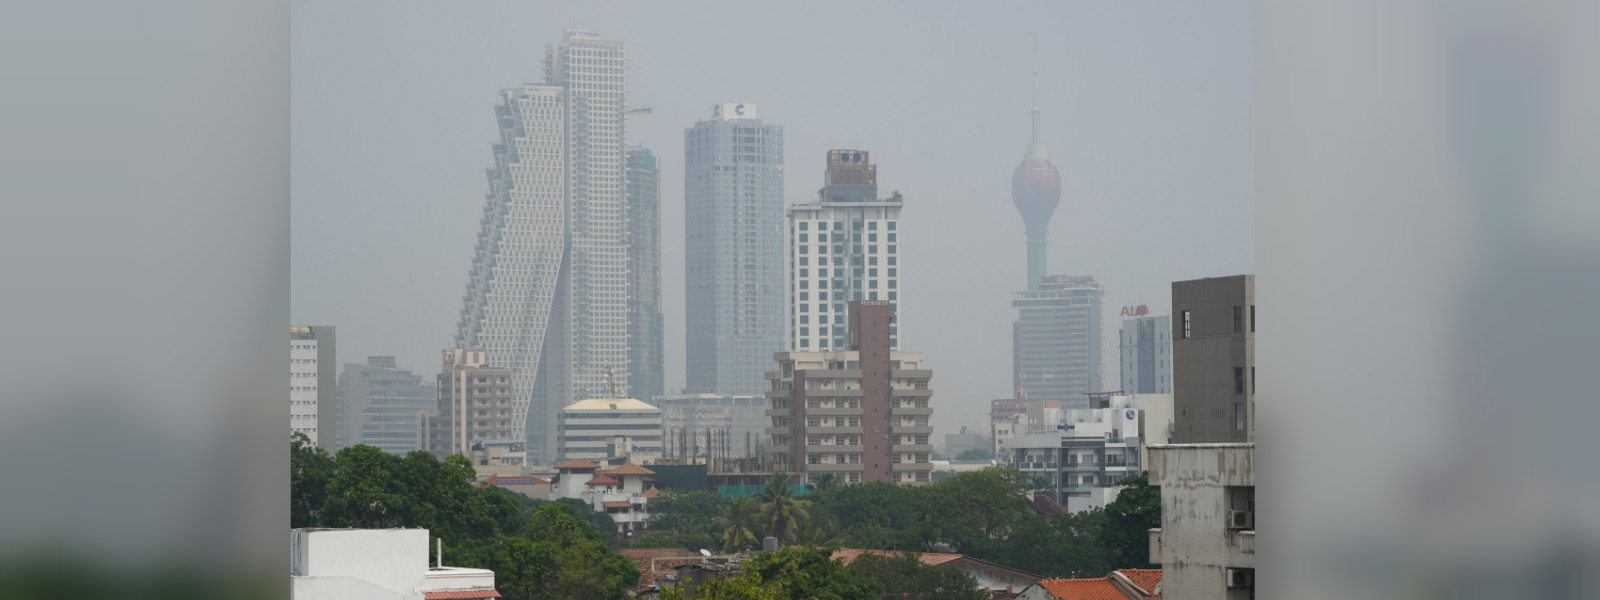 Air Quality Index of Colombo drops to an unhealthy level